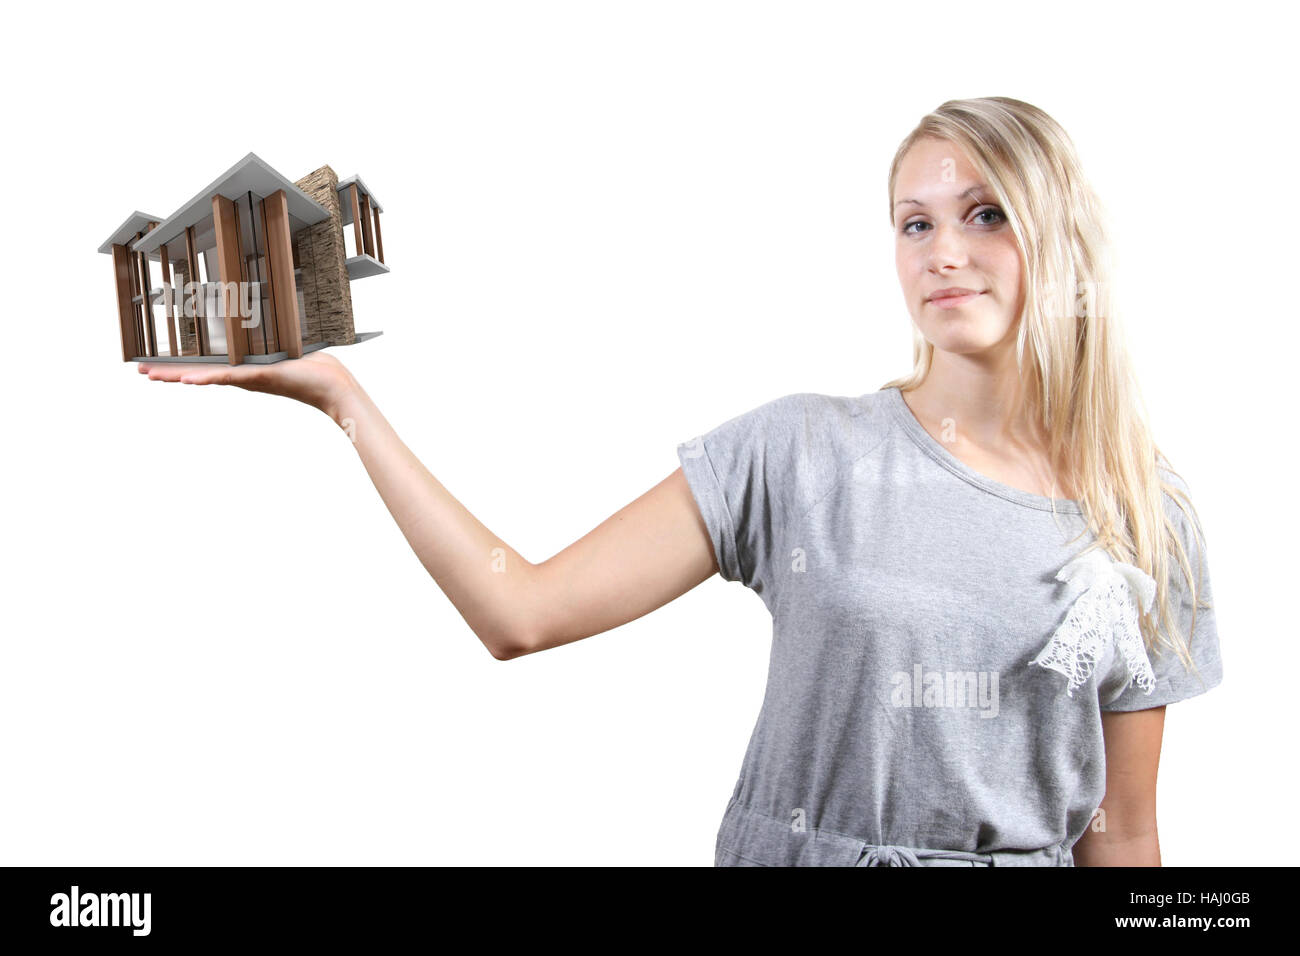 Concept of real estate business: woman with house on the hand Stock Photo